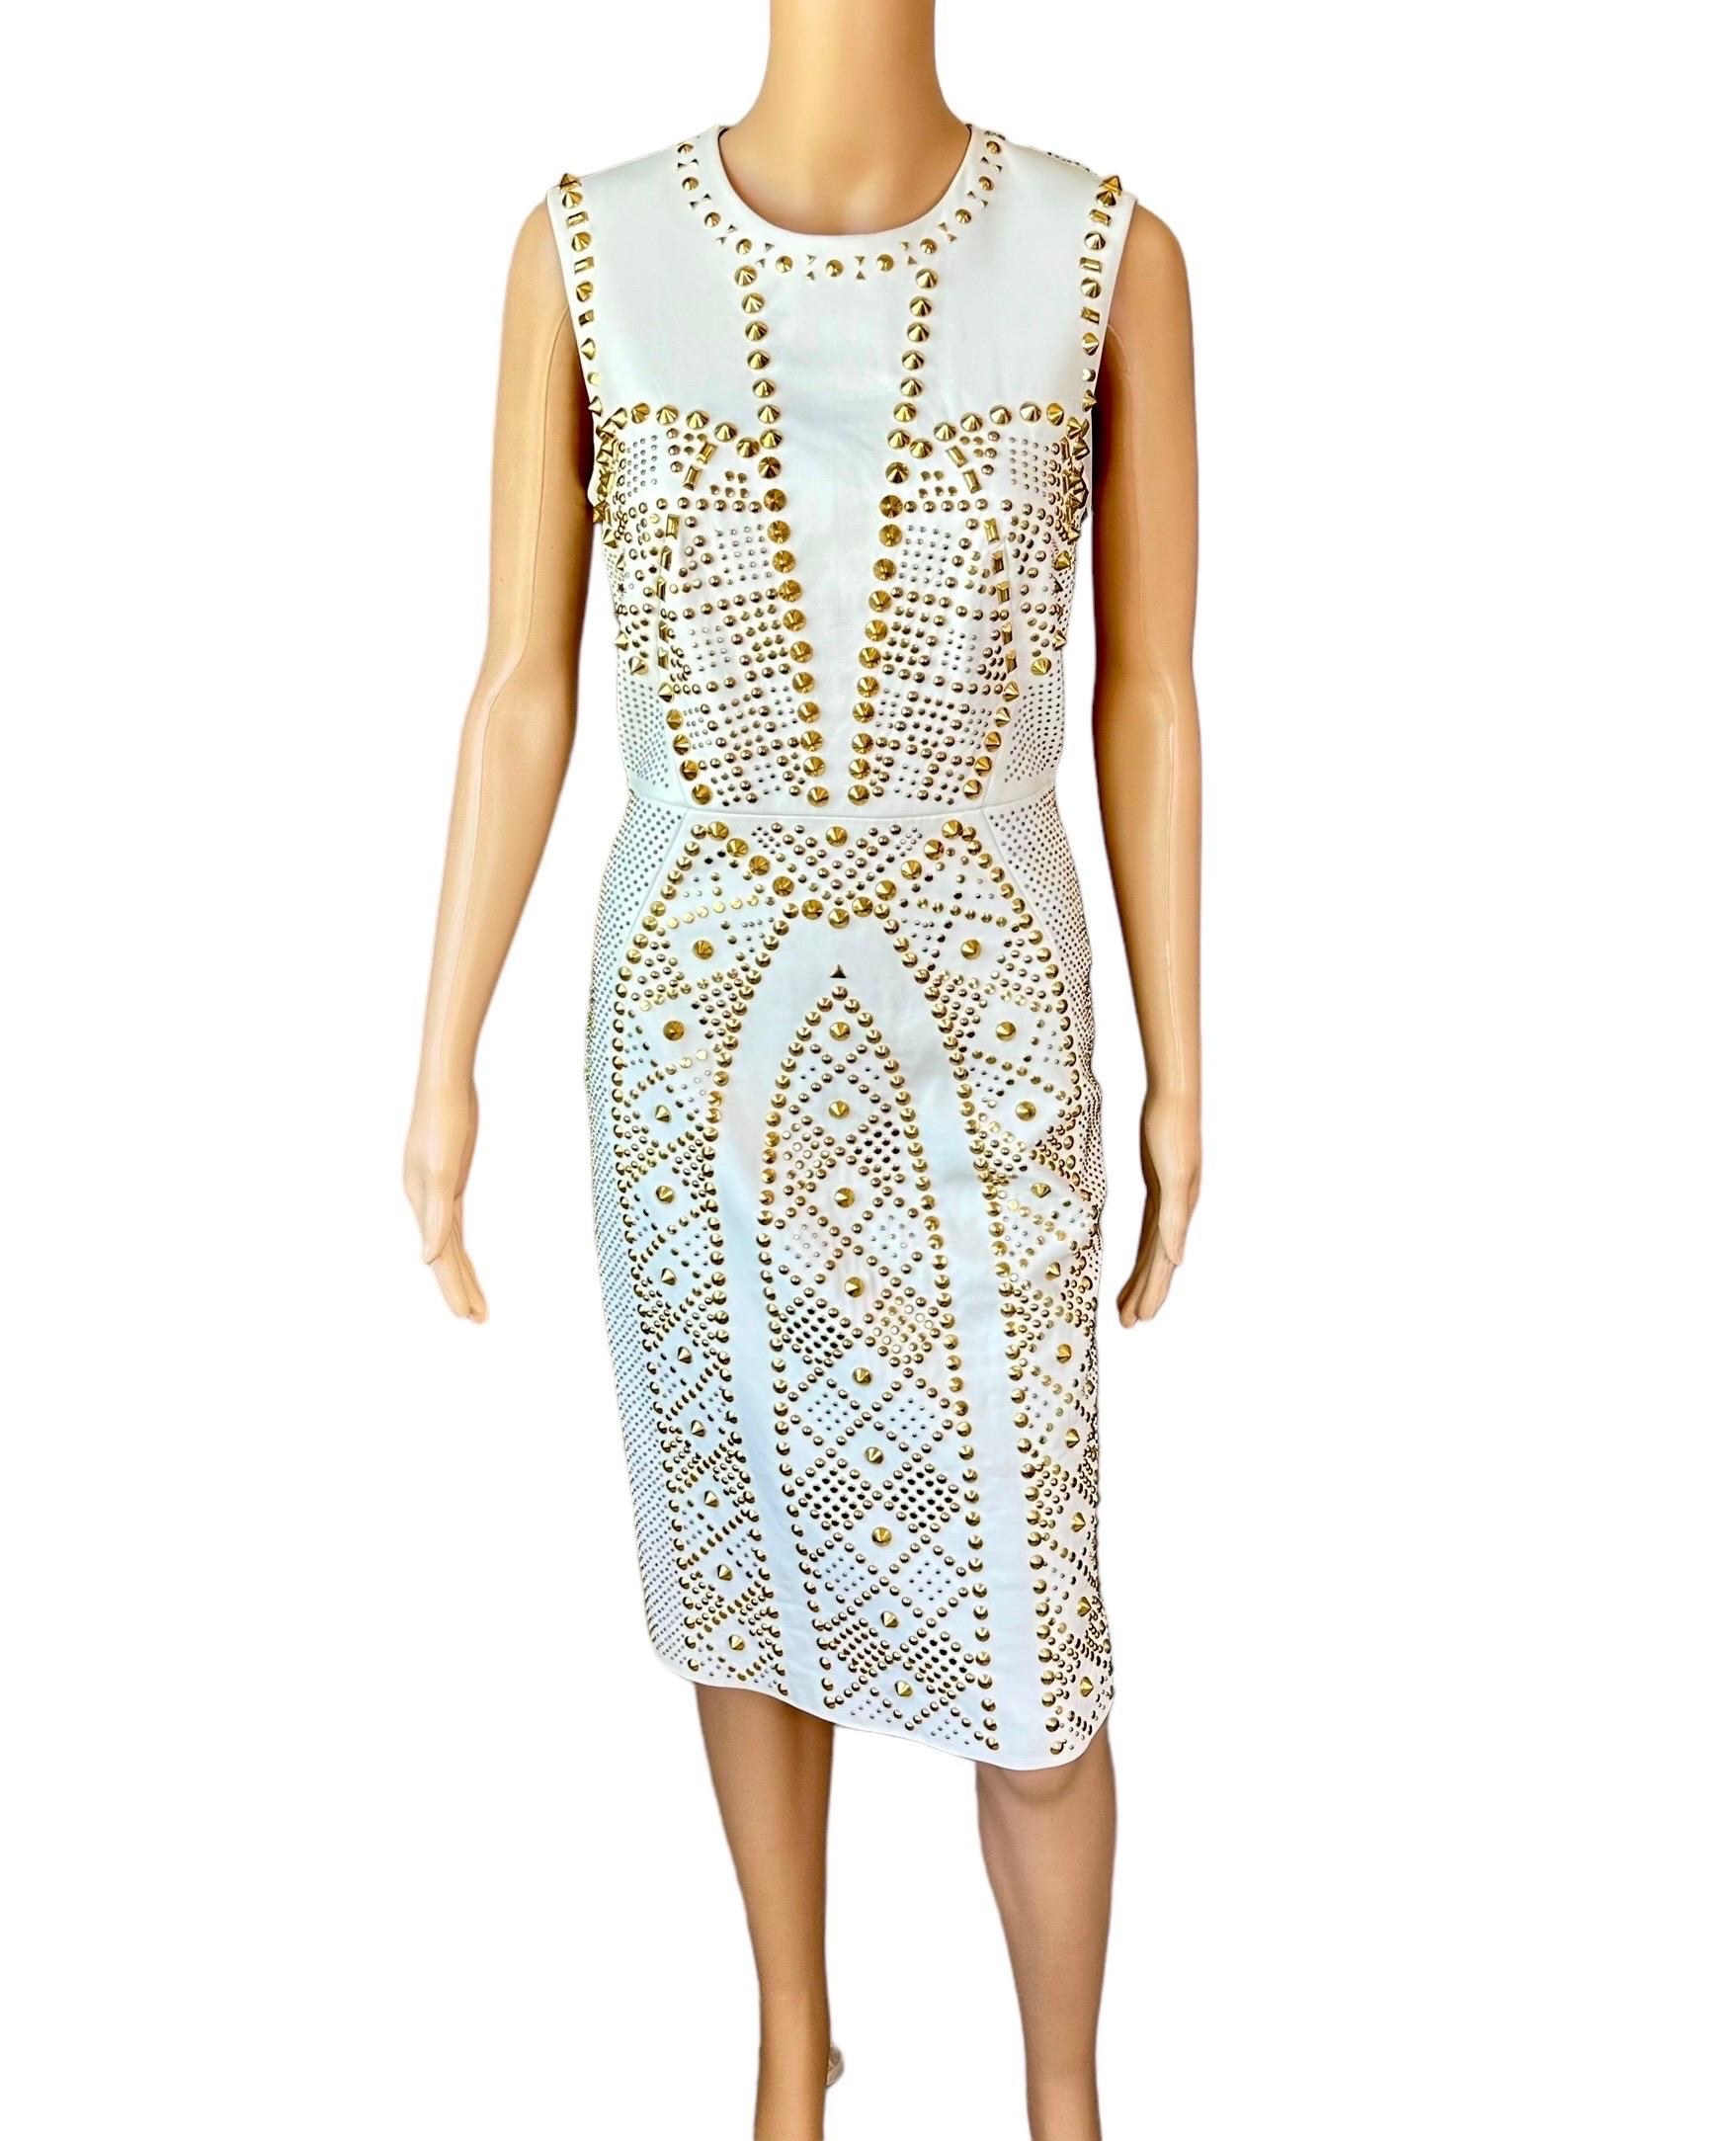 Versace S/S 2012 Runway Embellished Gold Studded Ivory Leather Dress IT 42

Looks 27, 29 & 45 from the Fall 2012 Runway and the Versace S/S 2012 Campaign. 